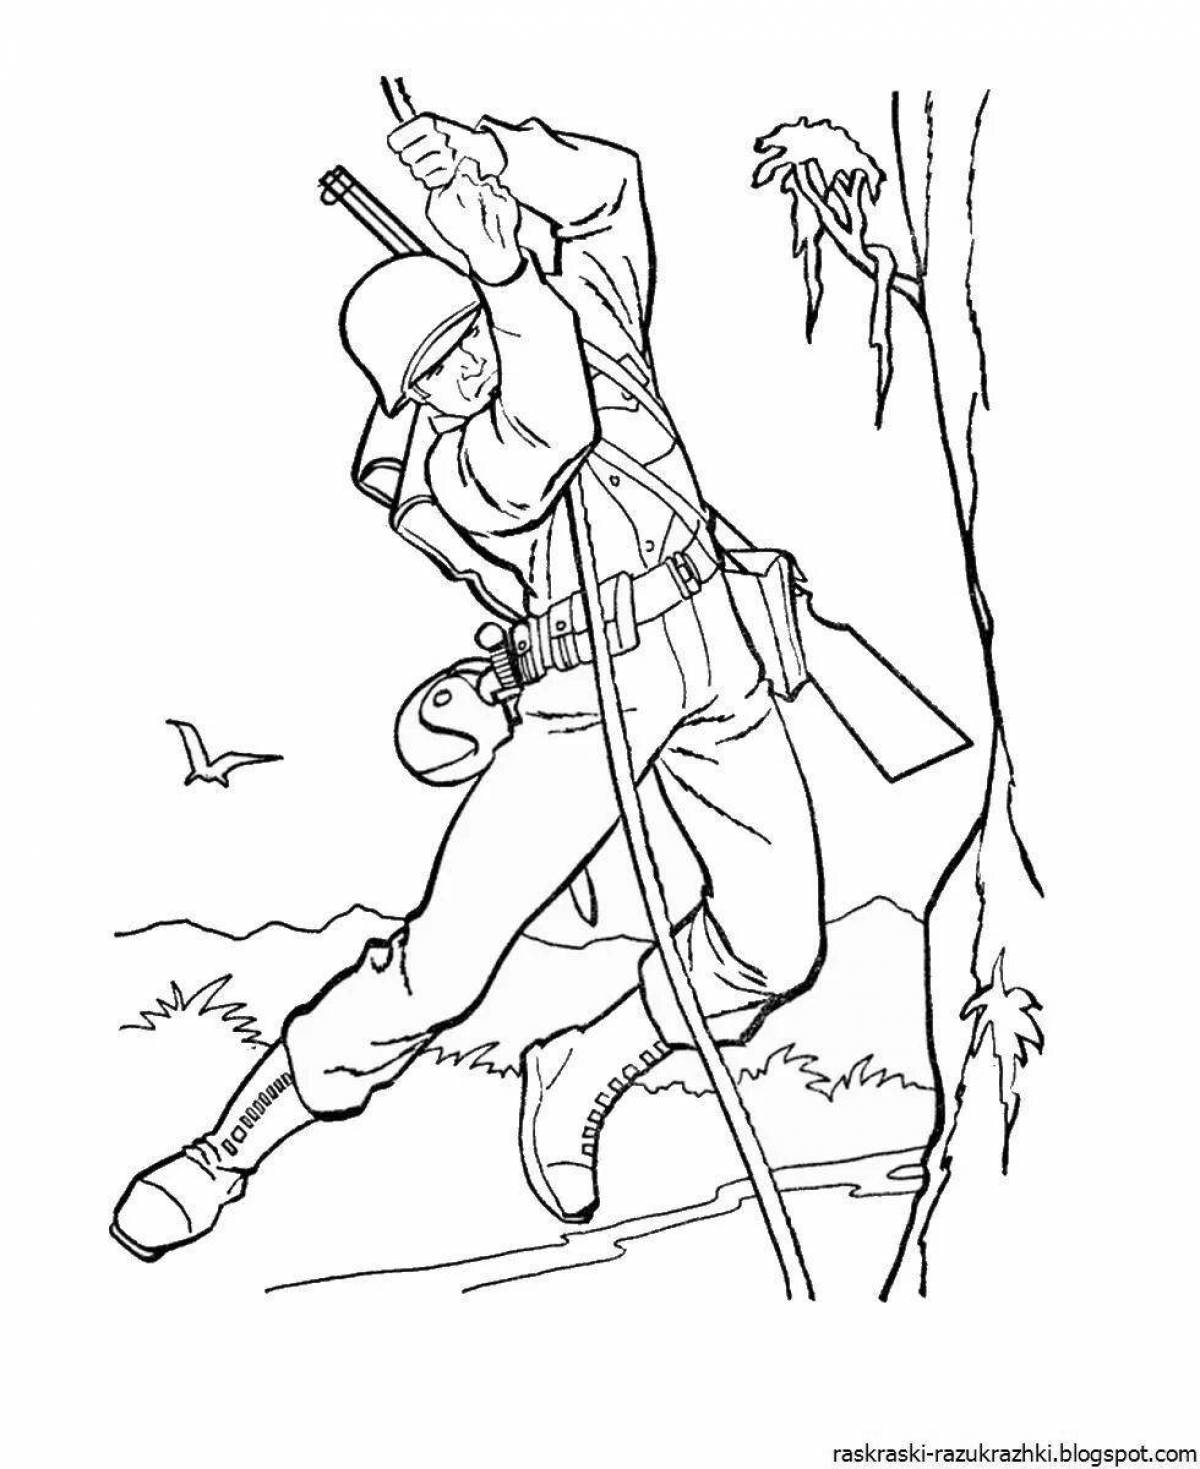 Soldier figurine coloring page